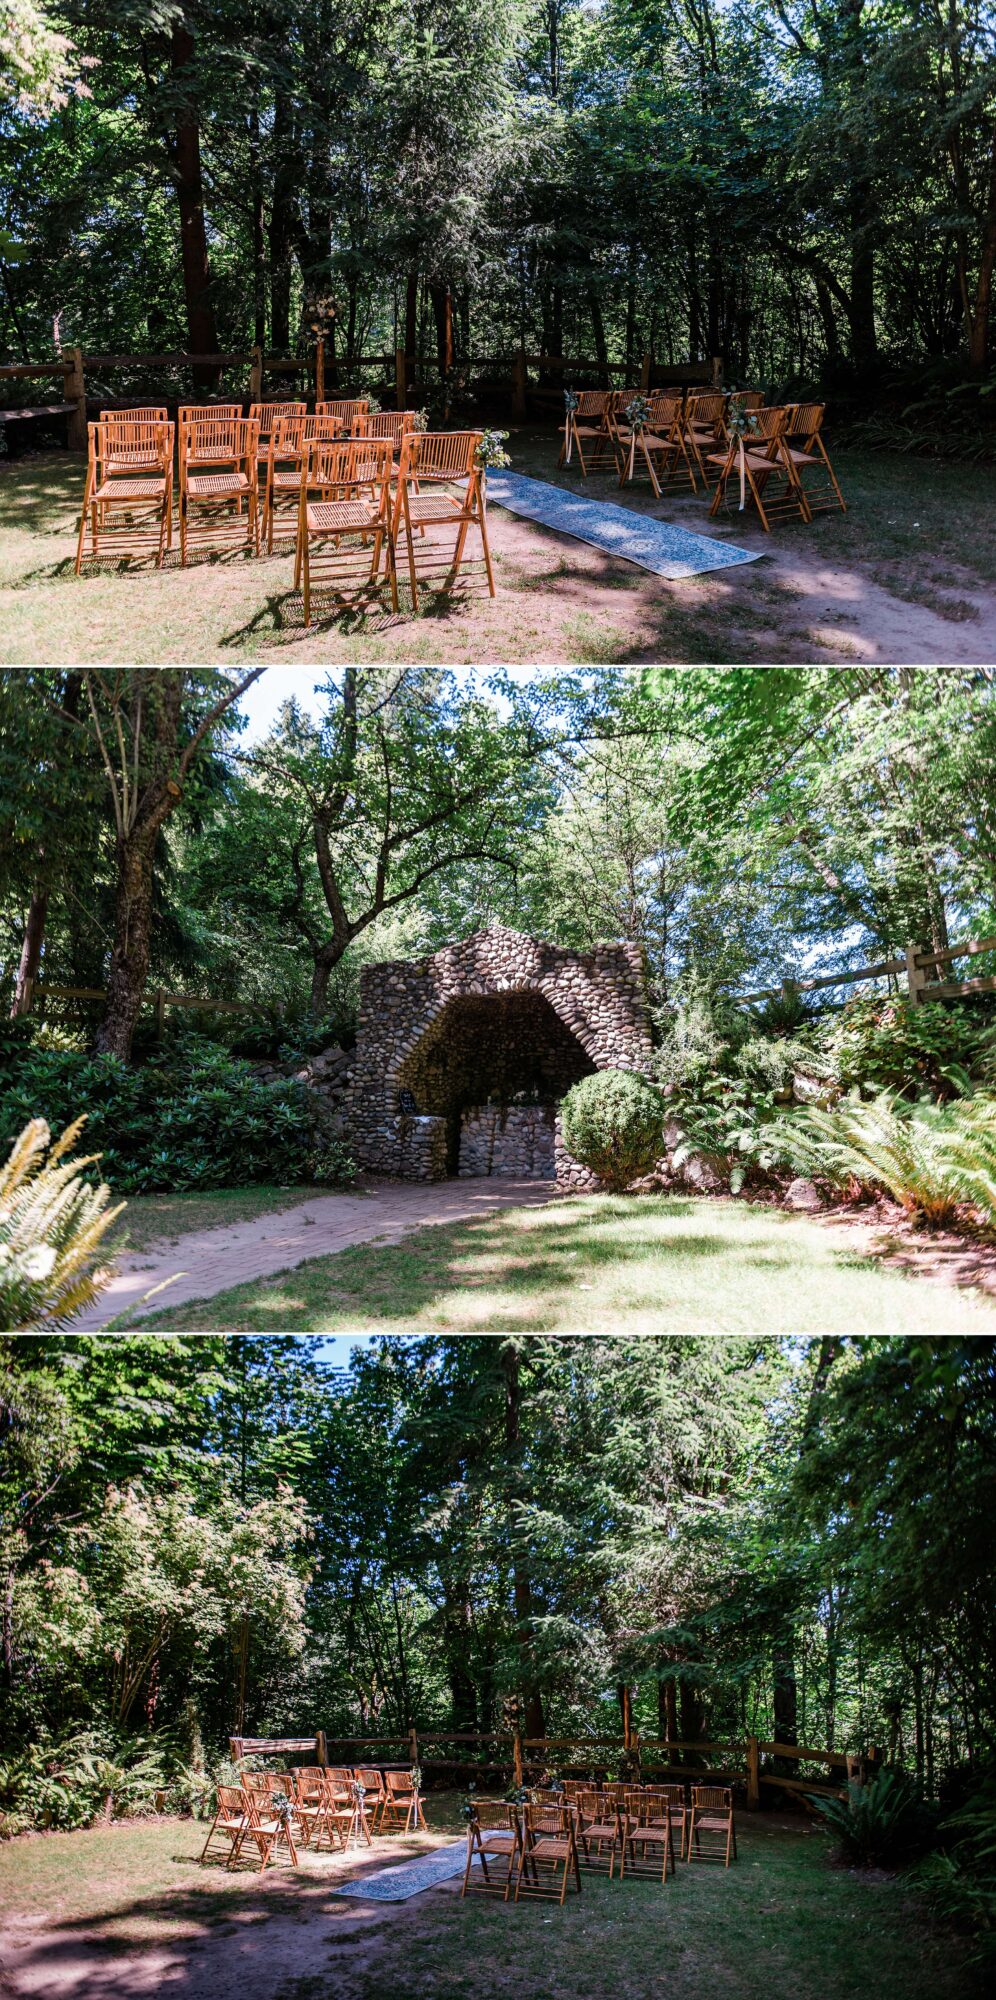 Grotto wedding ceremony site at St. Edward Park in Kenmore, Washington State, outside Seattle